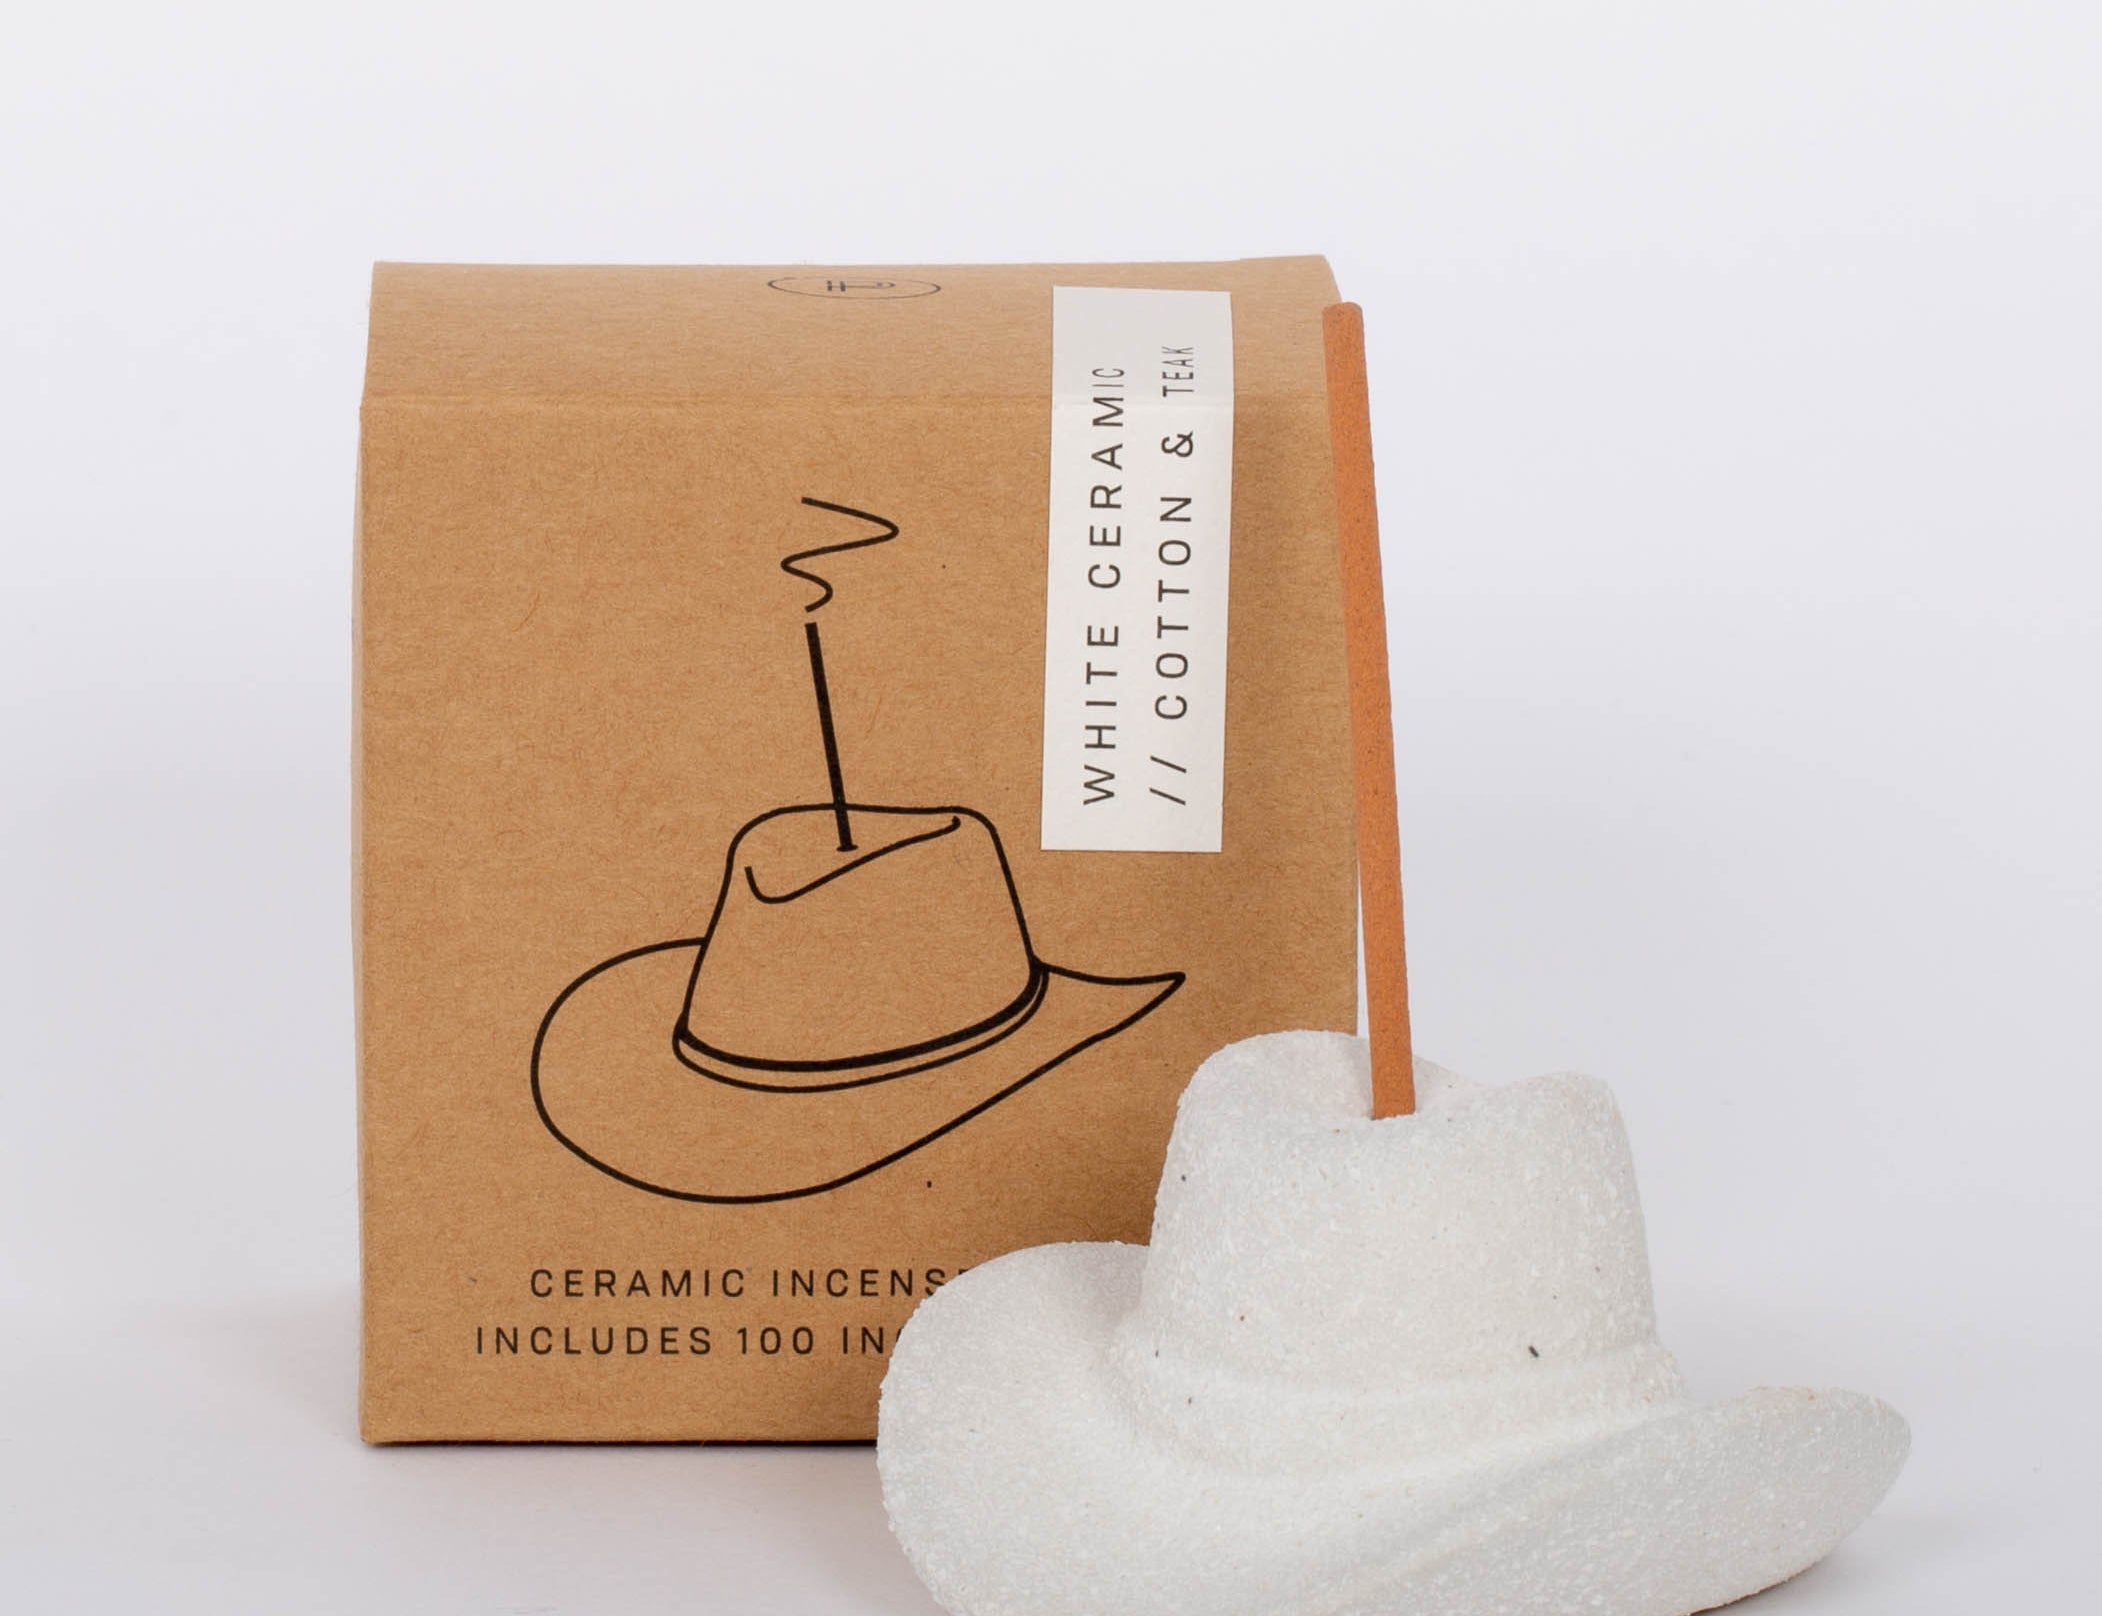 White Cowboy Hat Incense Holder This vintage-inspired incense burner is on of our favorites! Including 100 fragrant incense sticks of Palo Santo Suede, this ceramic incense holder will keep your space burning with ambiance and fragrant tones.